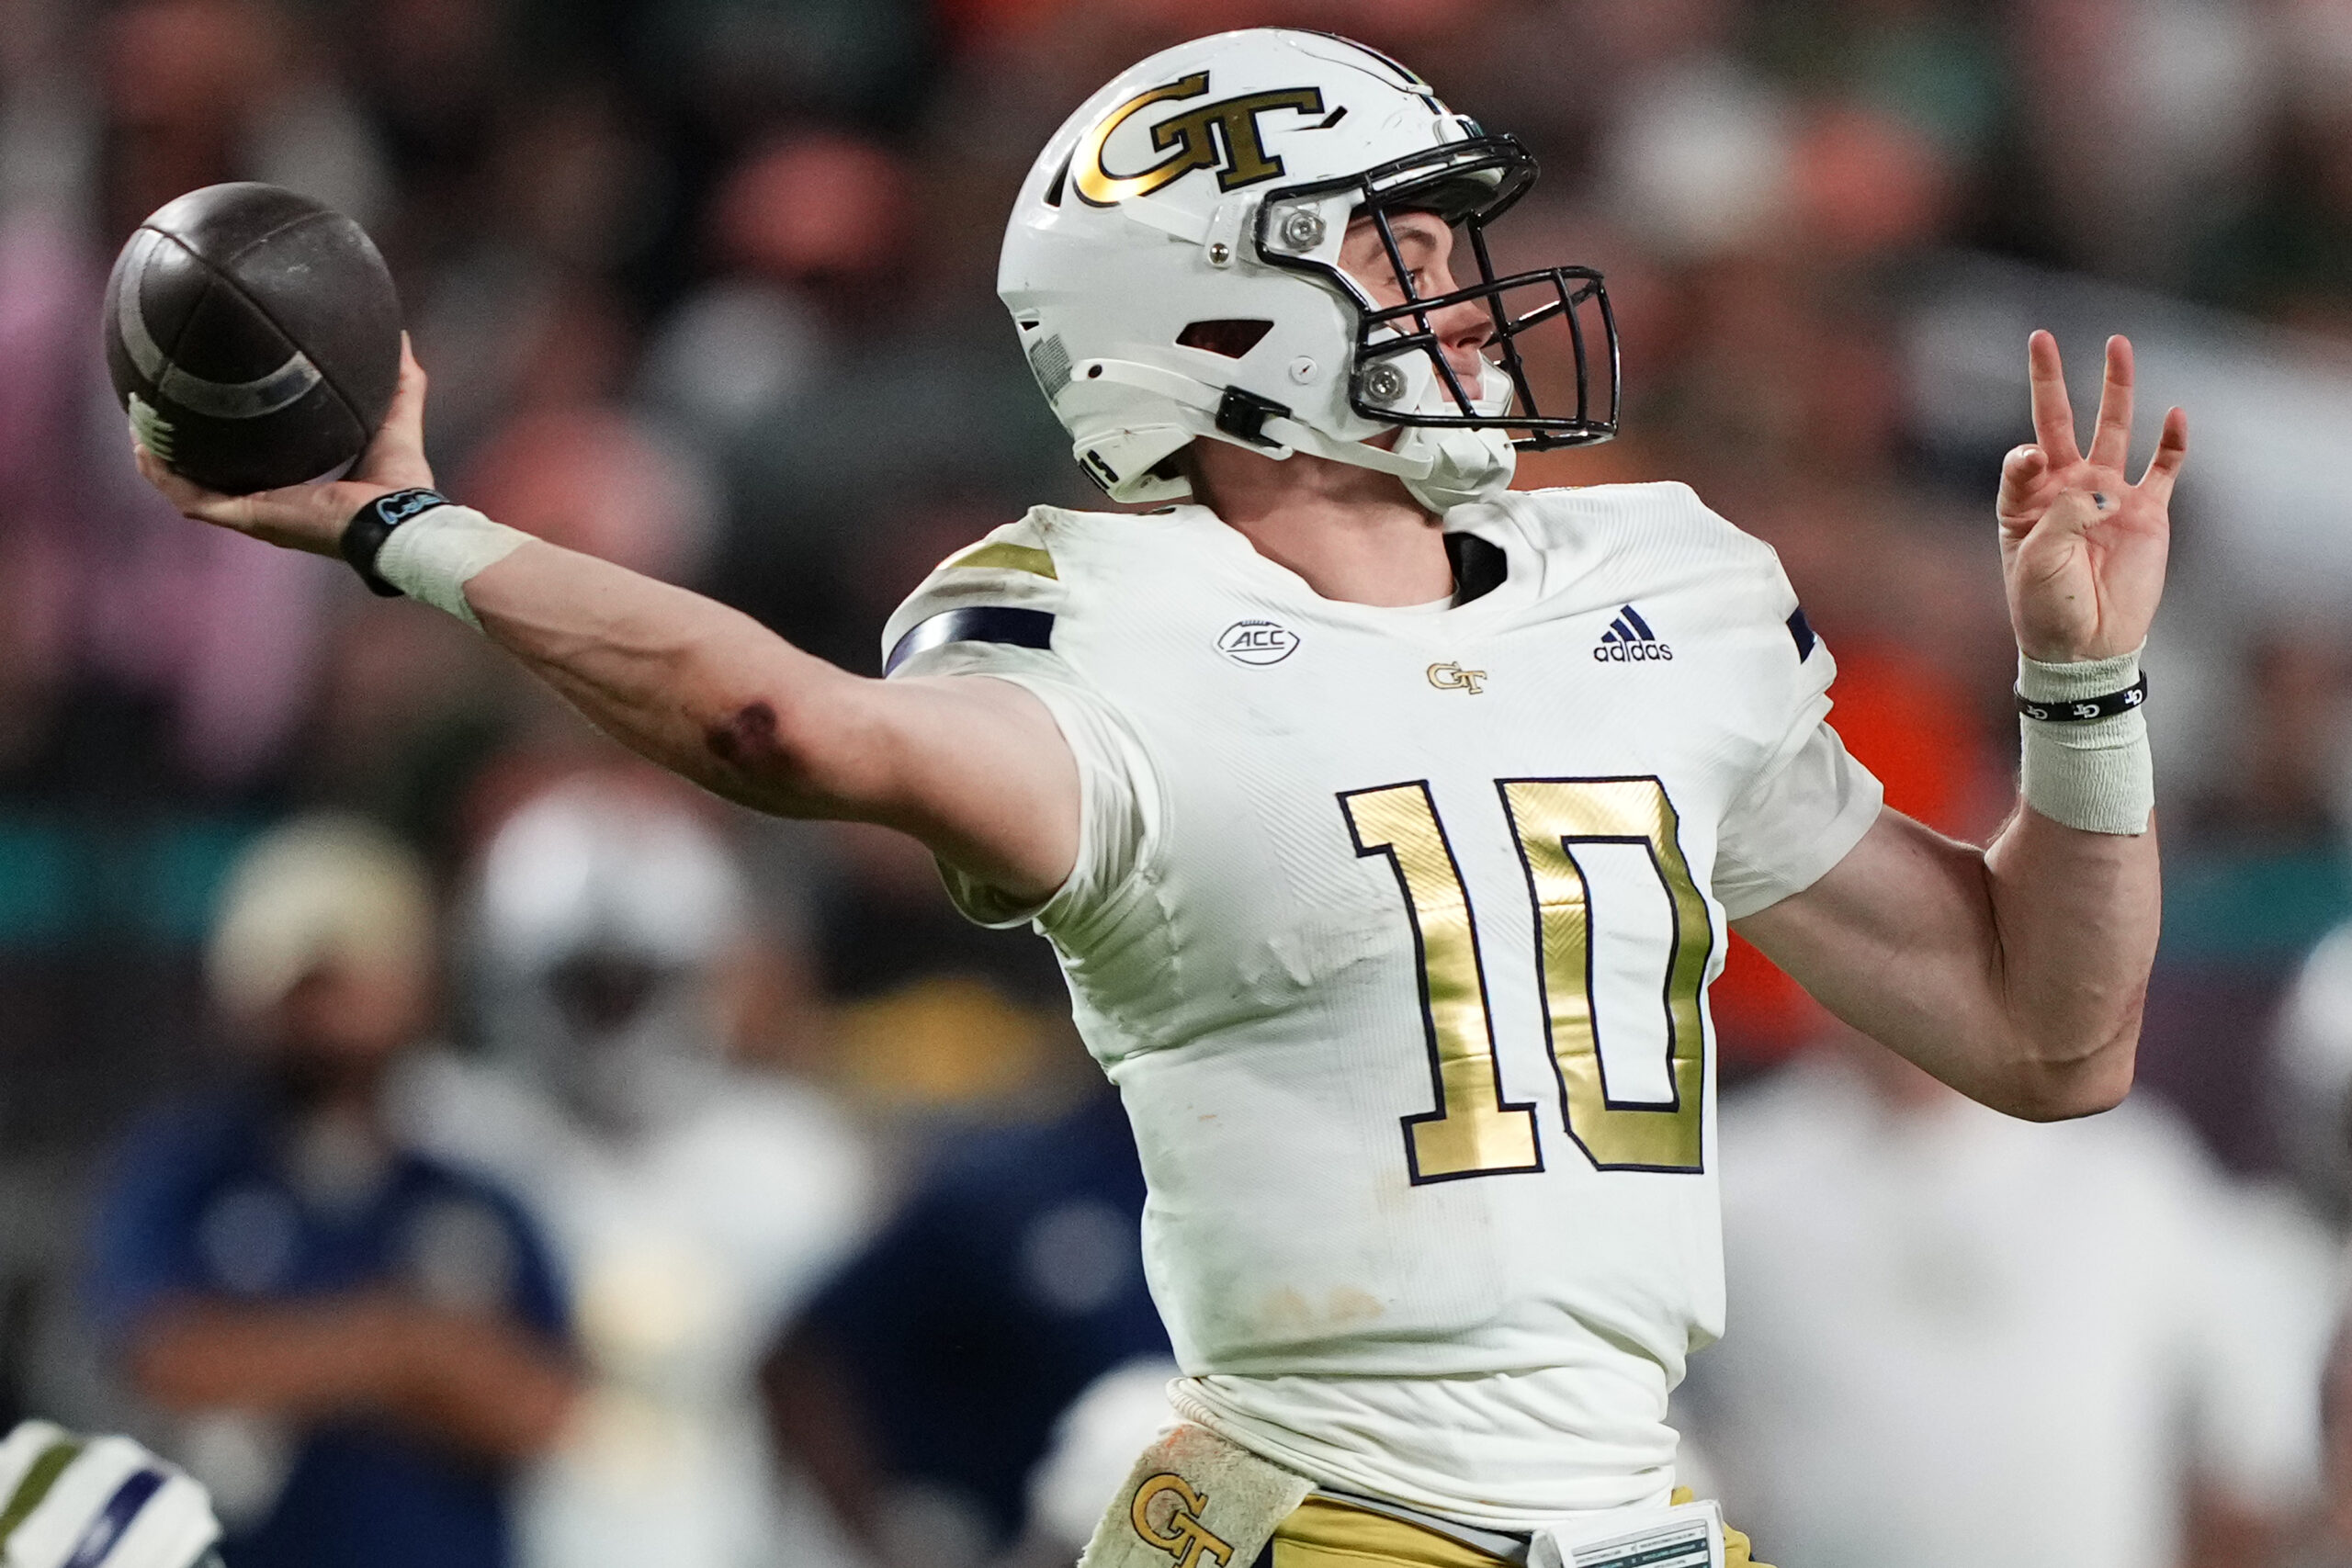 Georgia Tech staggers Miami after Hurricanes’ unfathomable gaffe